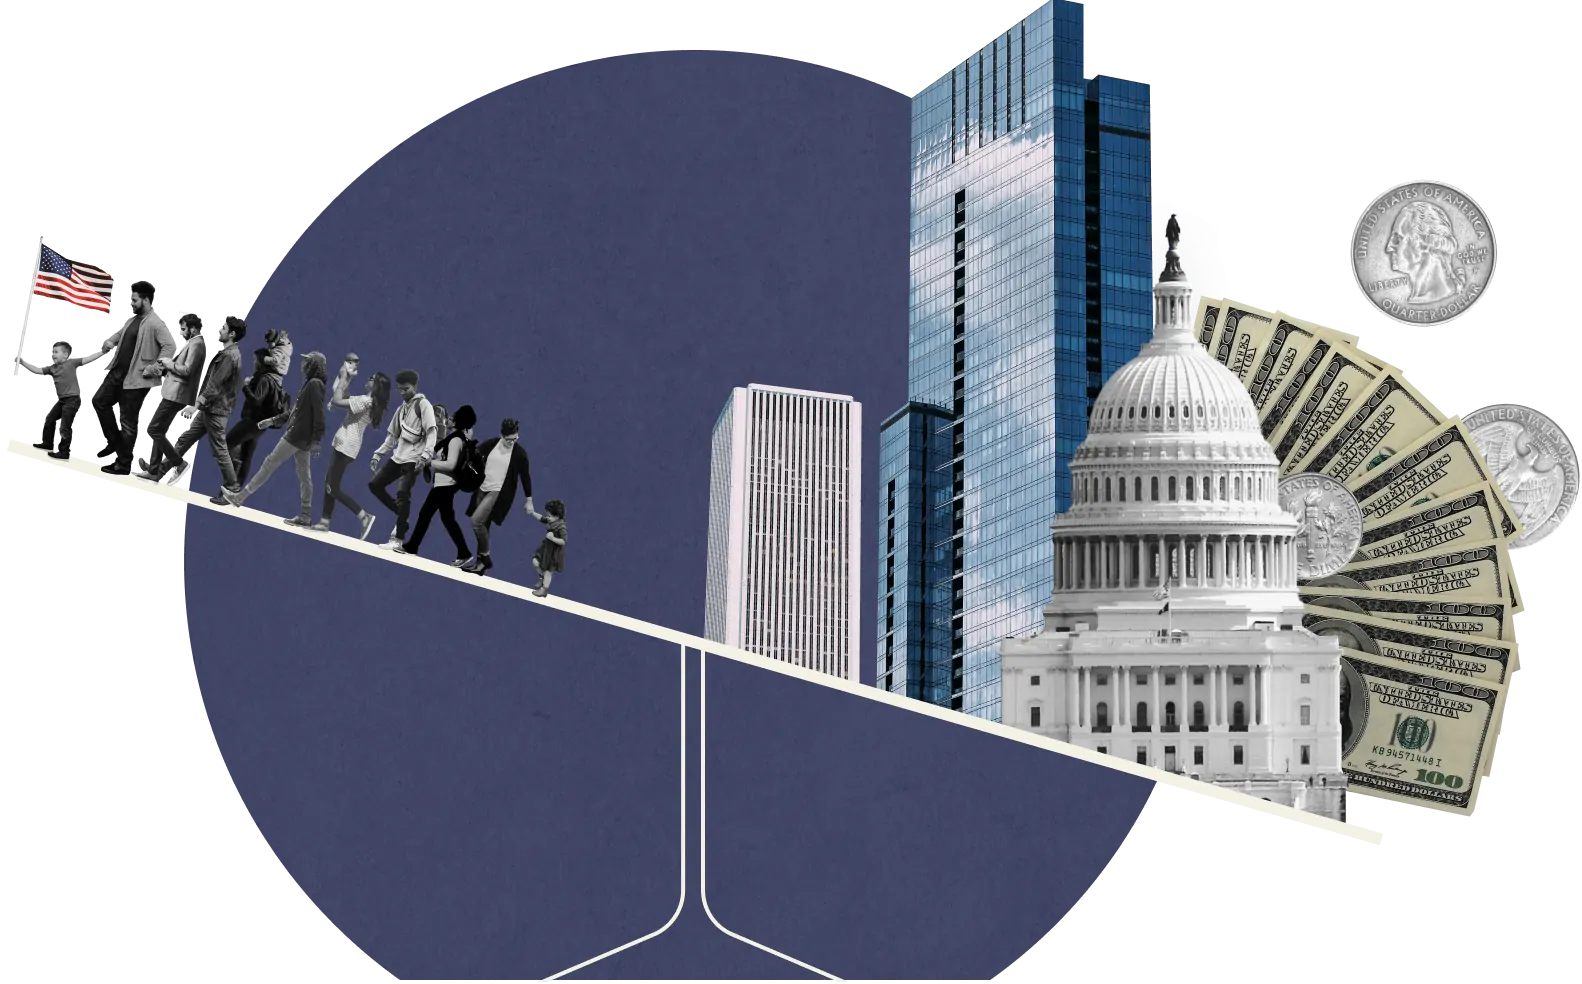 An illustration depicting a collage of a scale with people holding the US flag on the left and a collage of skyscrapers, money, and a capitol rotunda on the right. The scale is tipping to the right, towards the symbols of power and money.